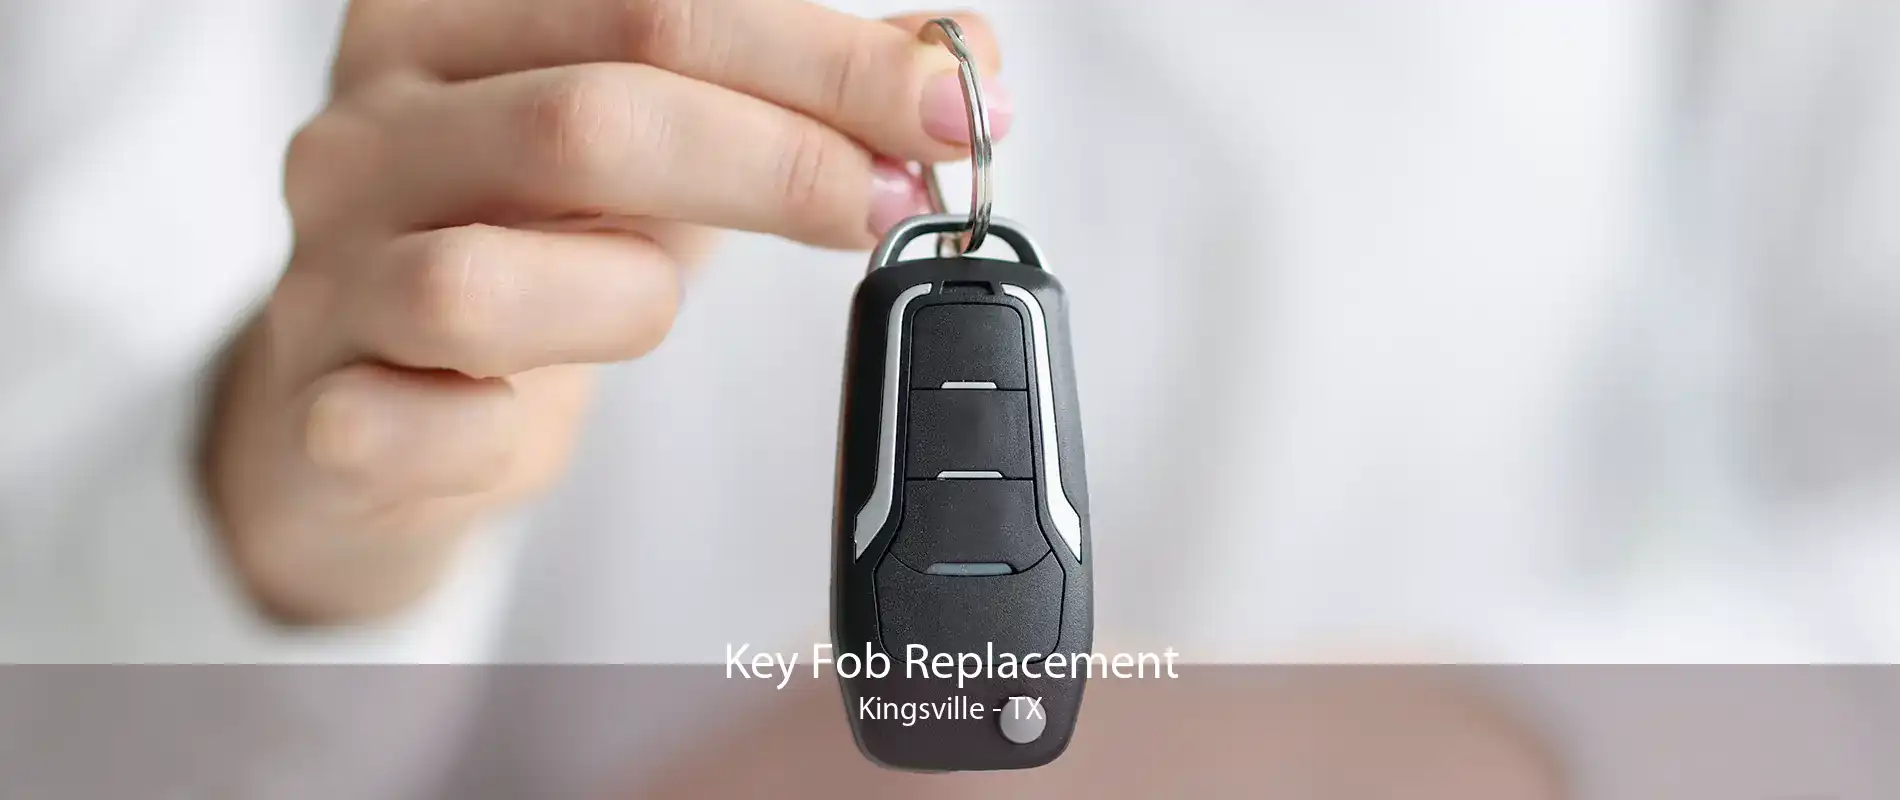 Key Fob Replacement Kingsville - TX